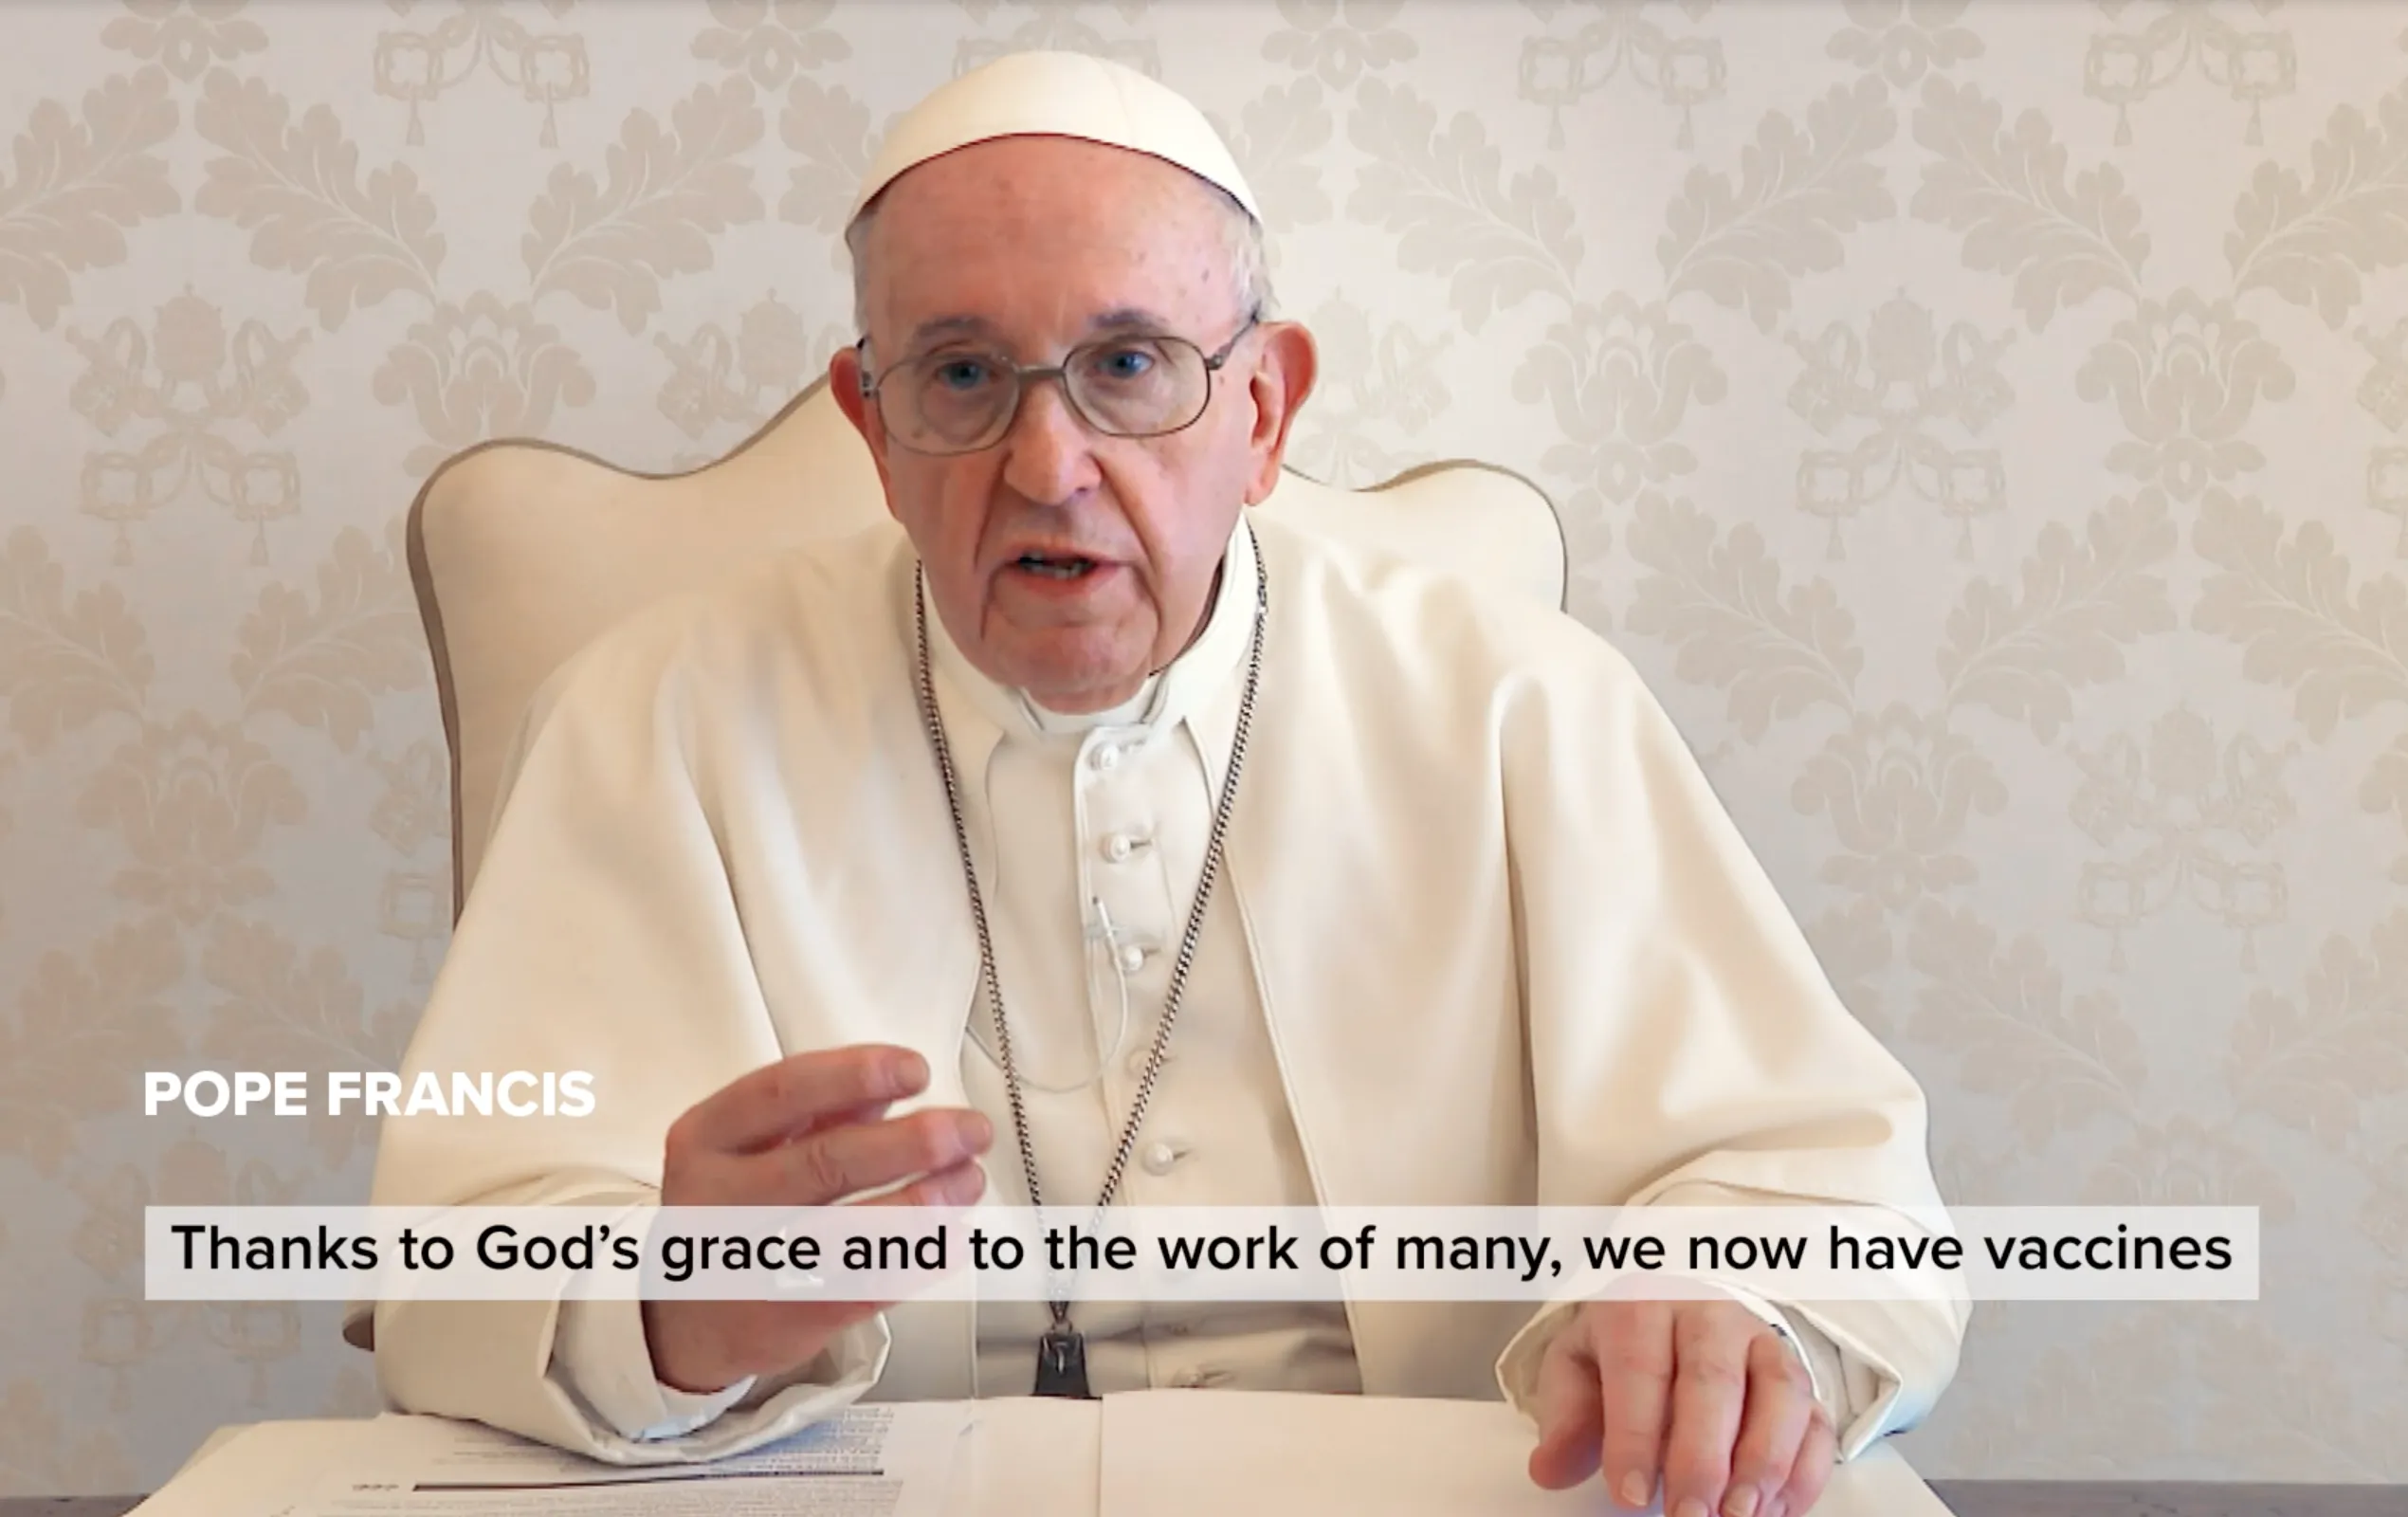 Pope Francis shares a video message about COVID-19 vaccines.?w=200&h=150